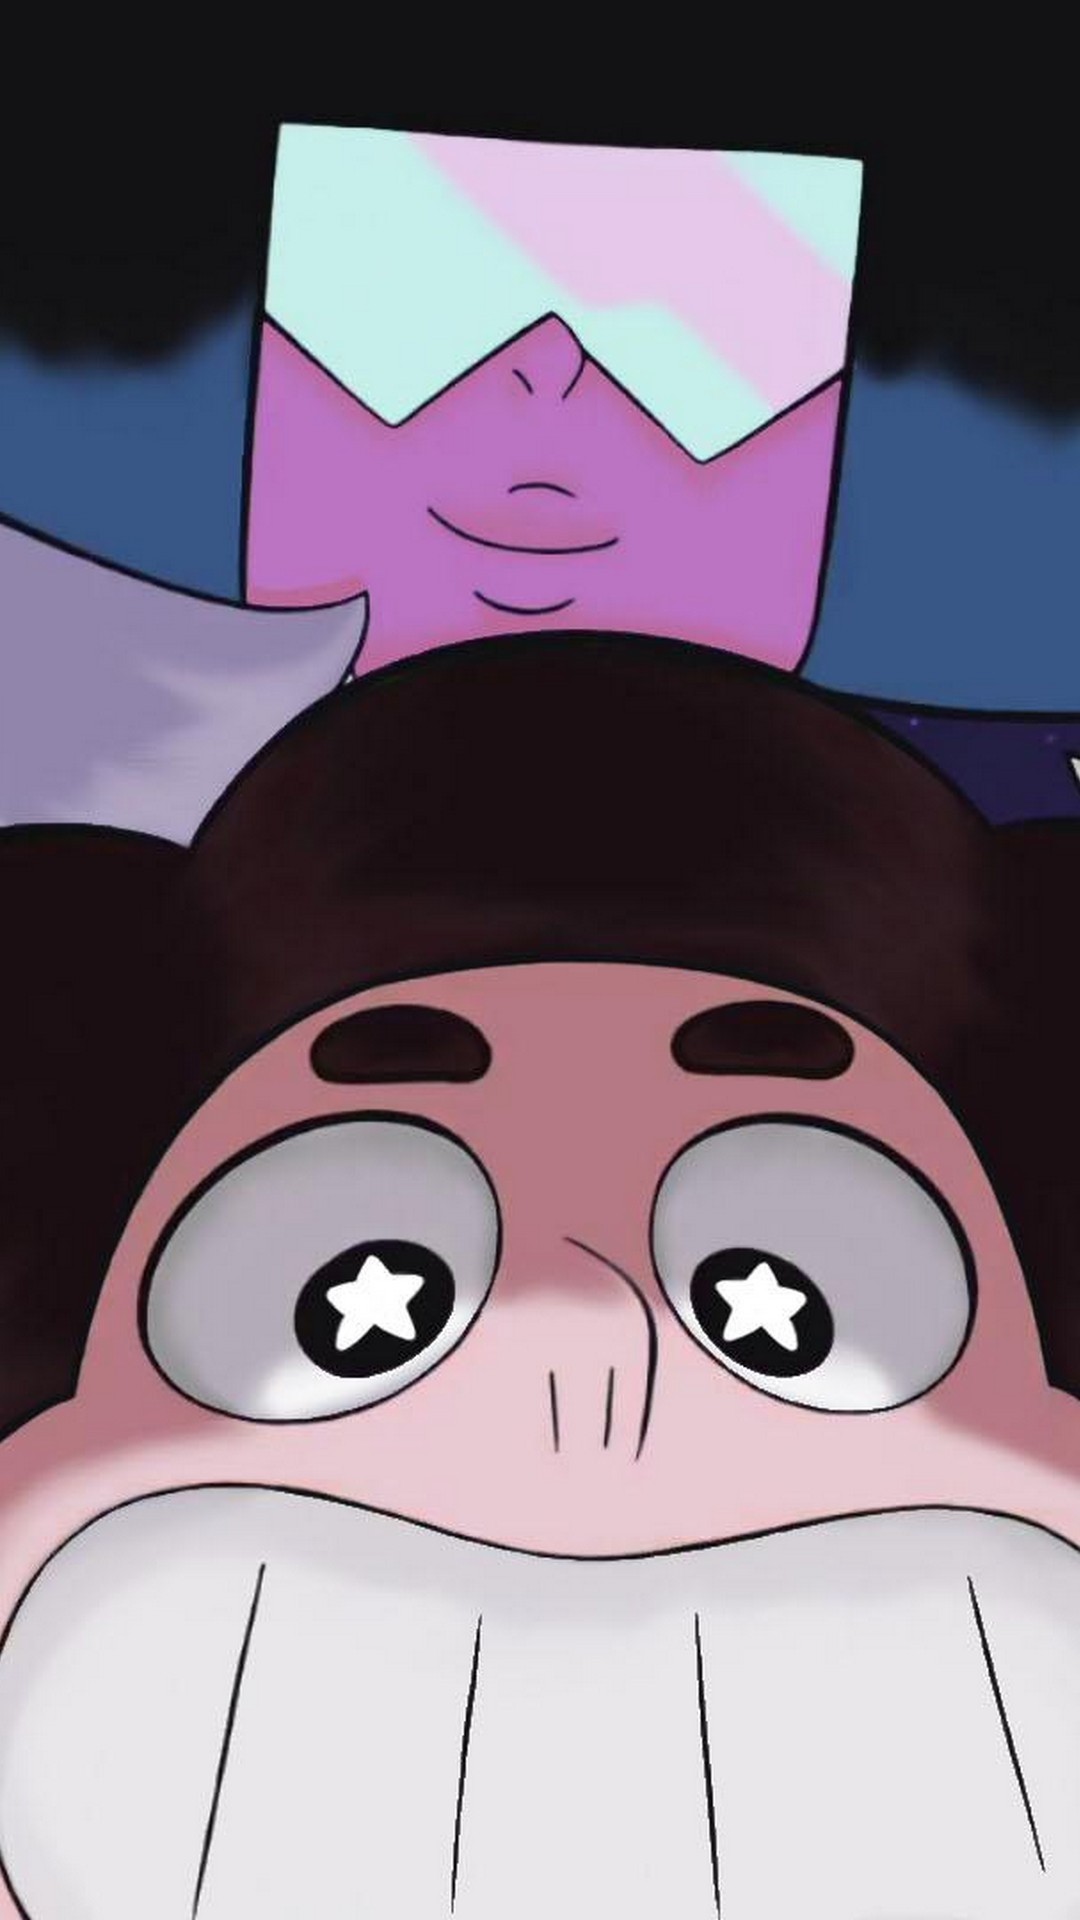 Steven Universe wallpaper for android